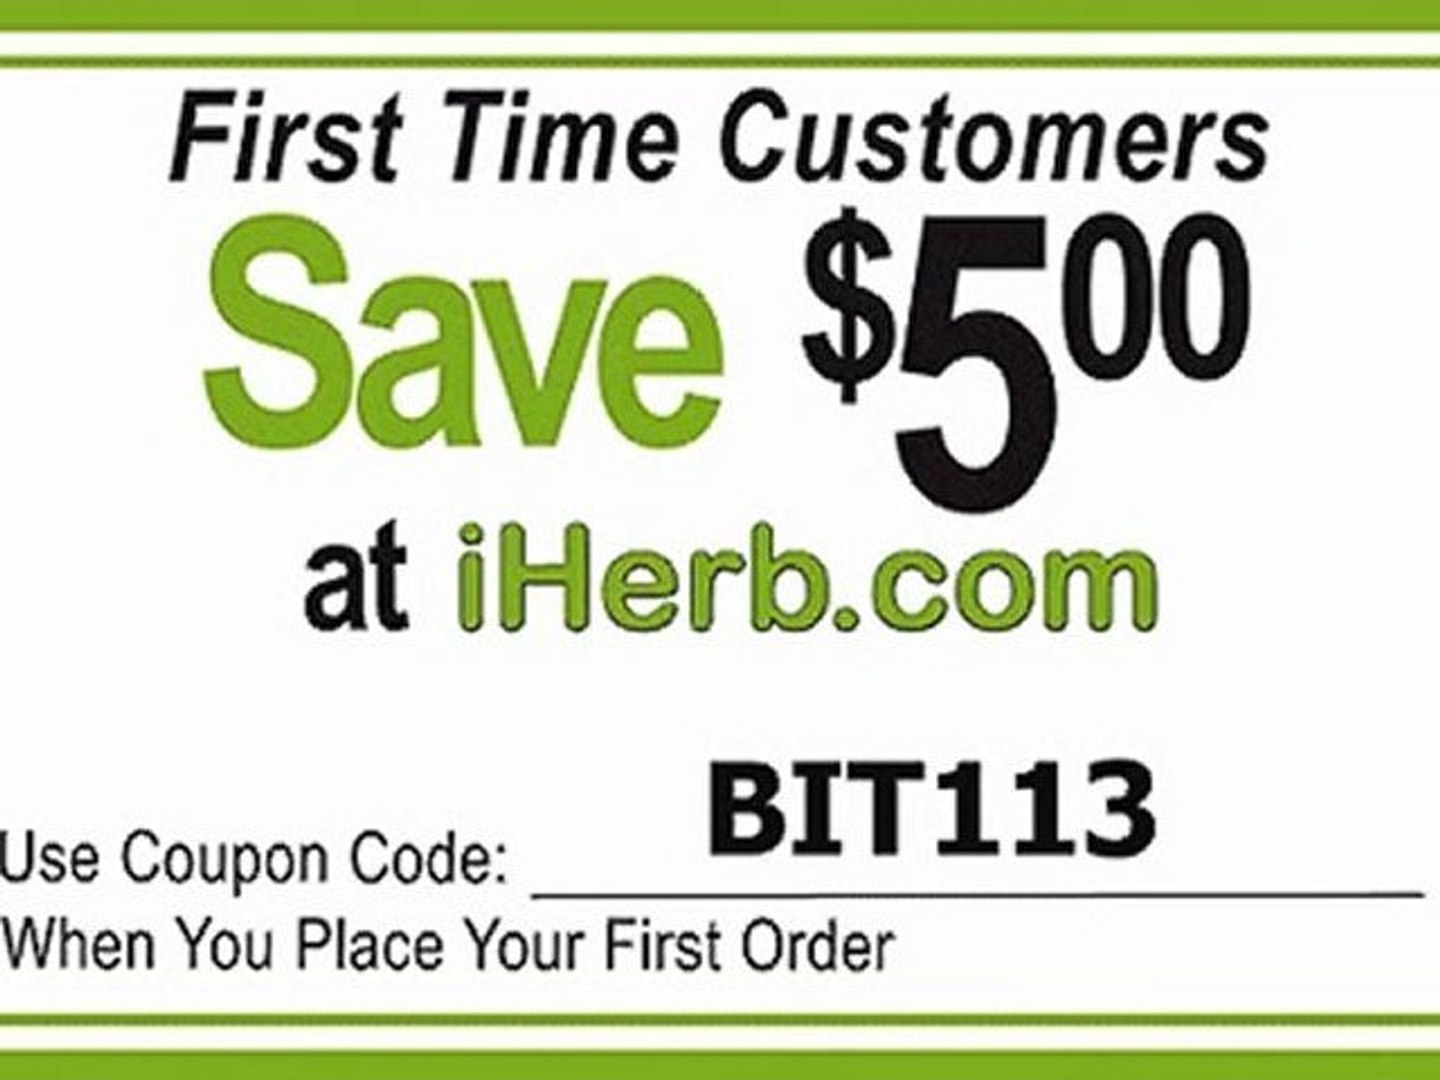 Iherb coupon vk com. Coupon one bite. One time customer.